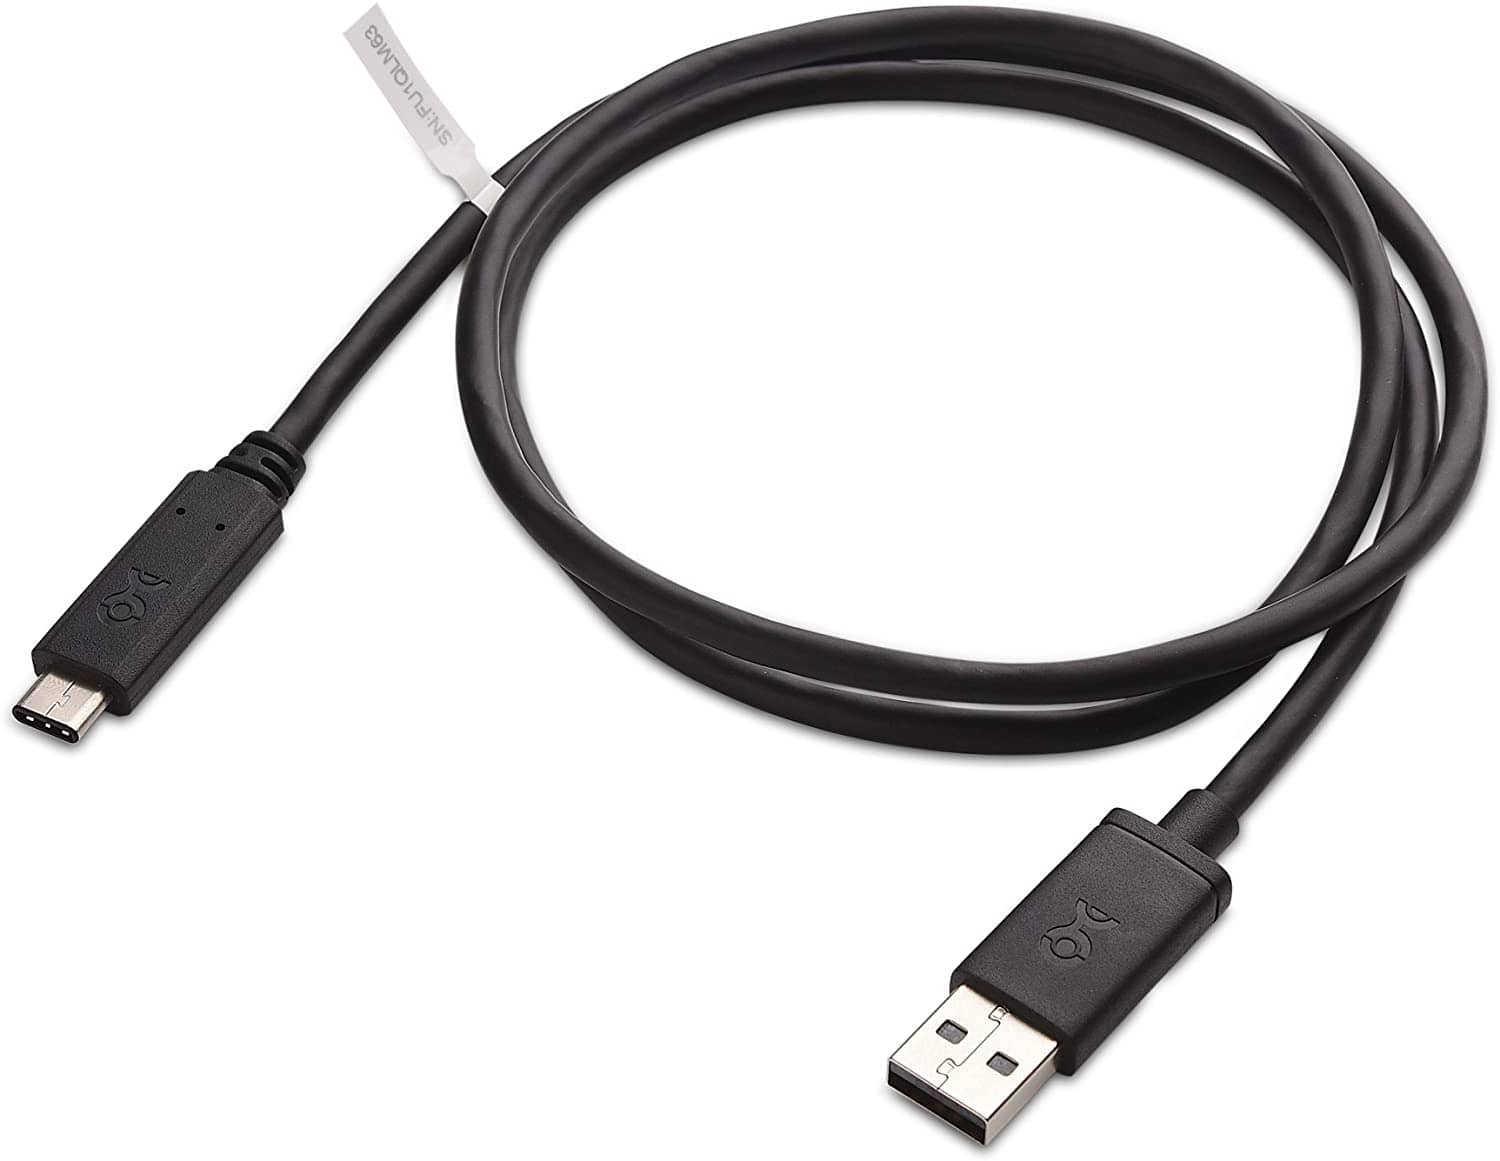 Cable Matter USB Type A to Type C charging cable